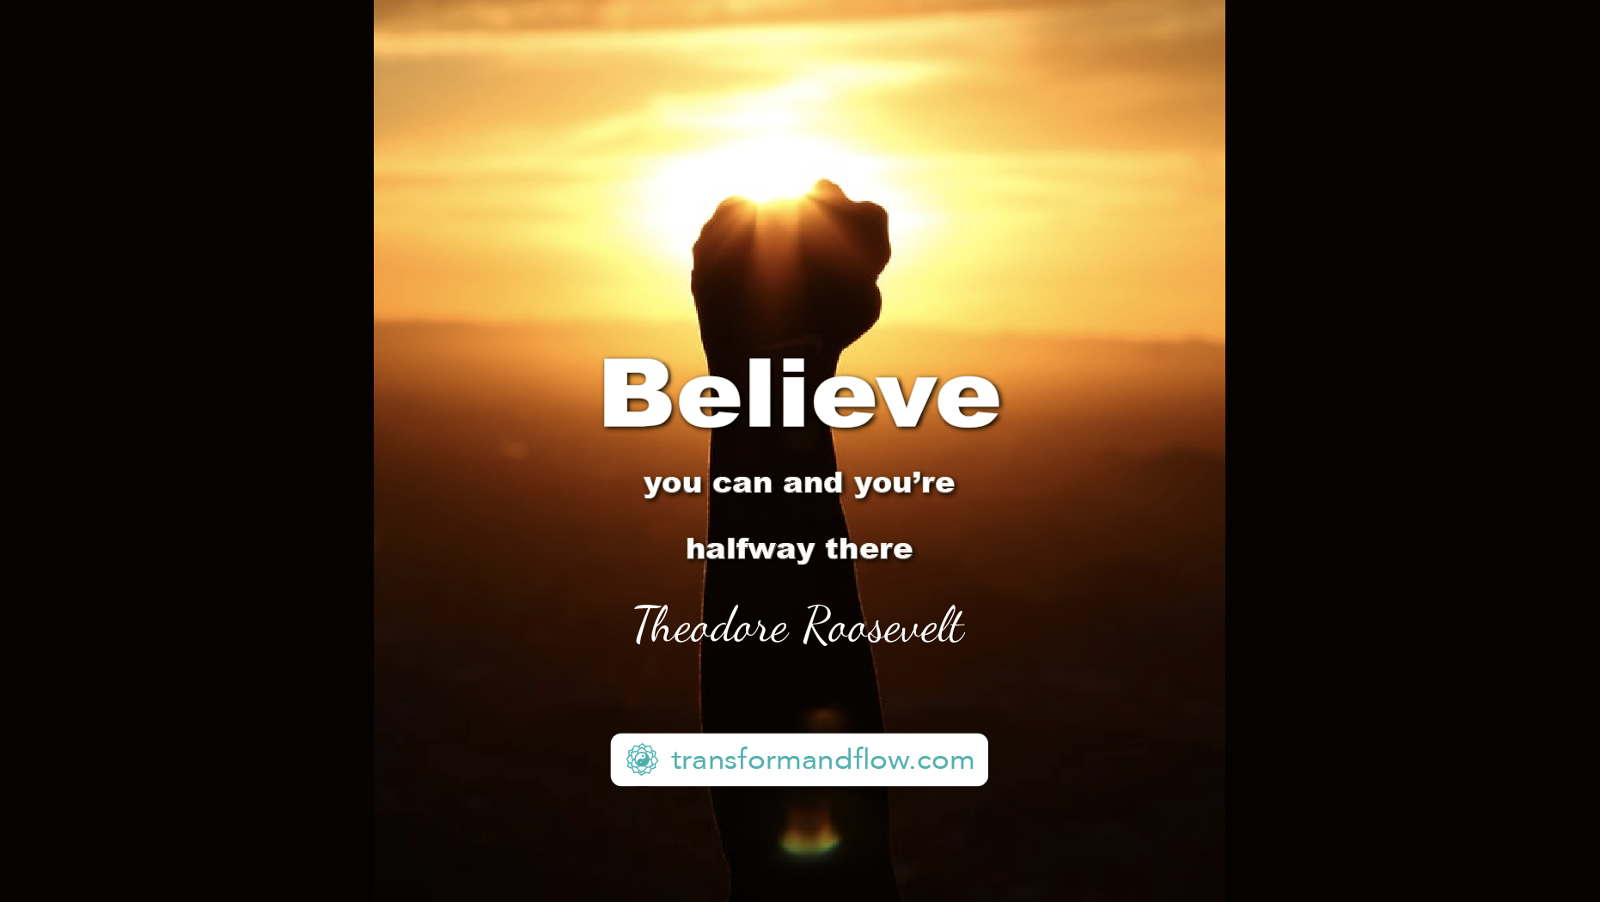 "Believe you can and you’re halfway there" Theodore Roosevelt